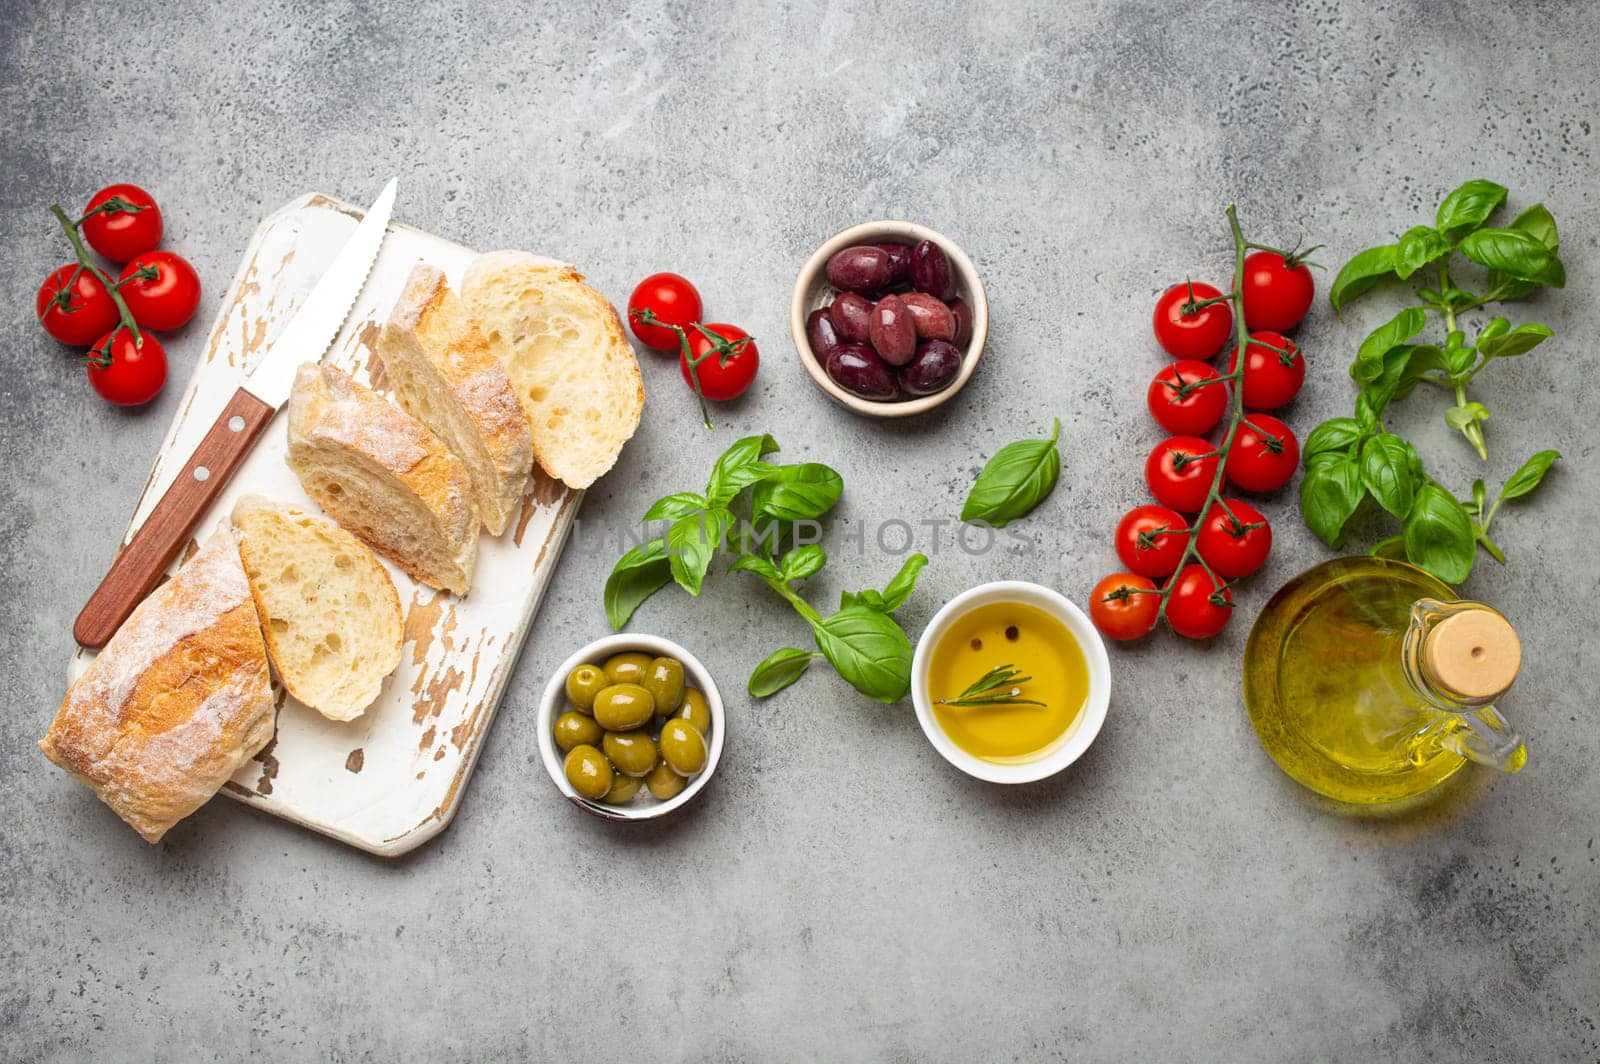 Food composition with sliced ciabatta, olives, olive oil, spaghetti, fresh basil, cherry tomatoes on gray concrete stone rustic background top view. Italian cuisine concept by its_al_dente